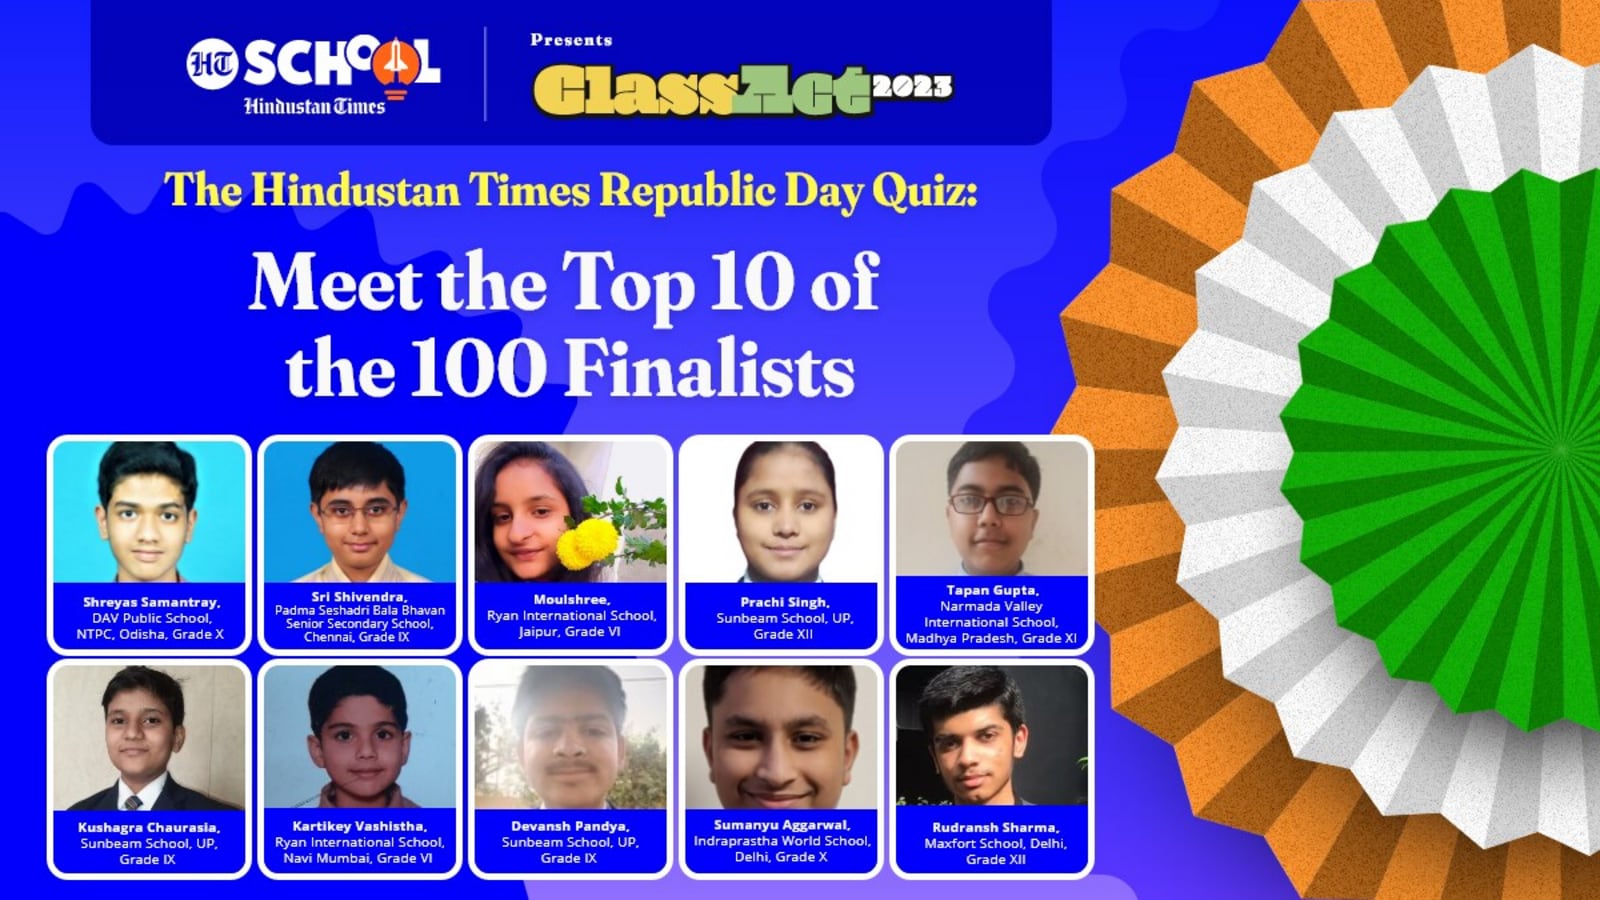 Tête-à-tête with the top 10 finalists of ClassAct 2023–The HT R-Day Quiz